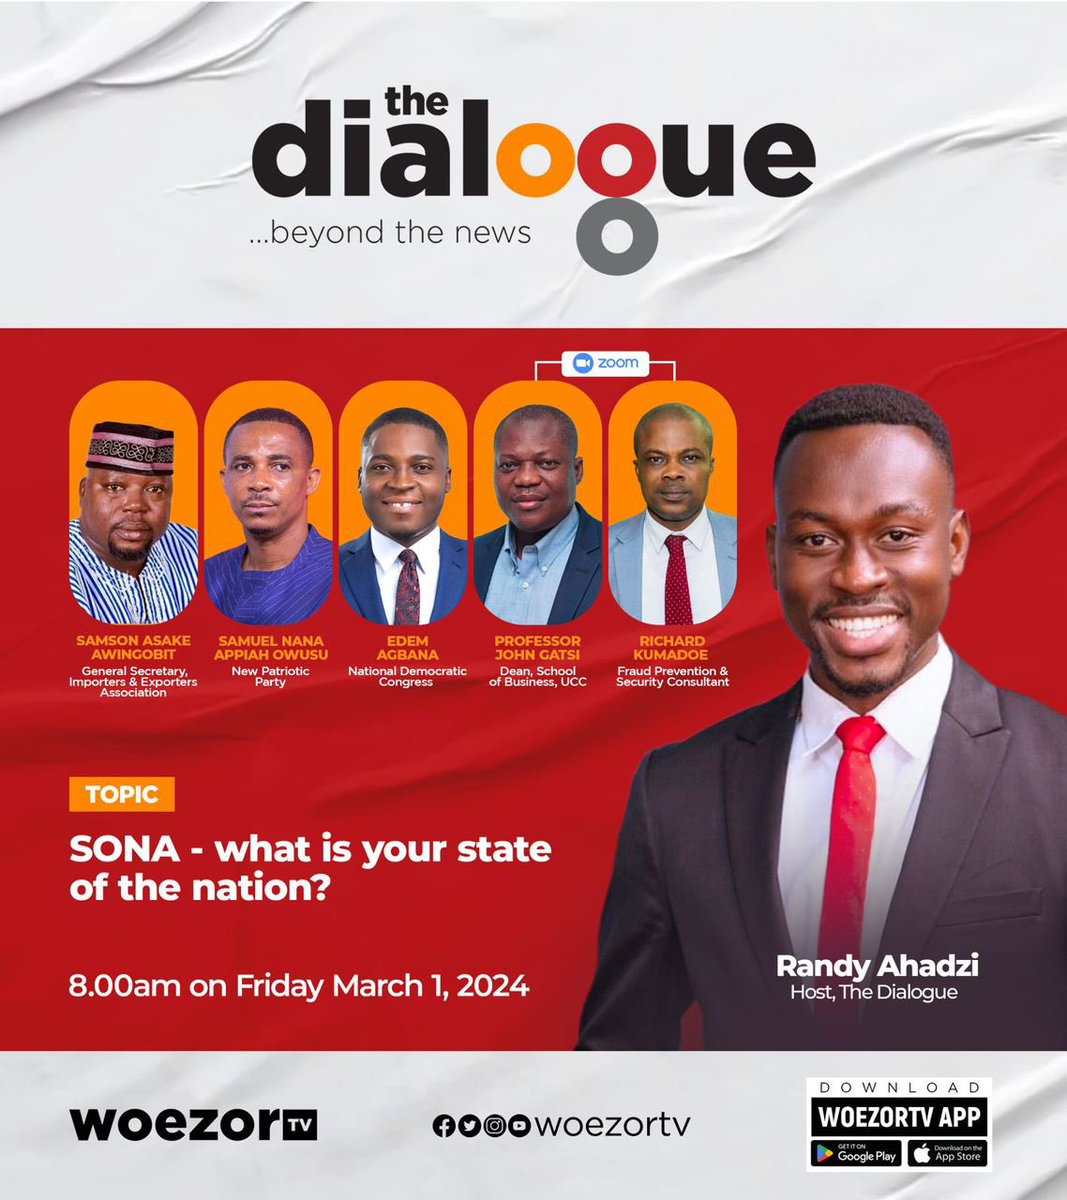 Discussing your State of the Nation on #theDialogue this morning from 8.00 am.